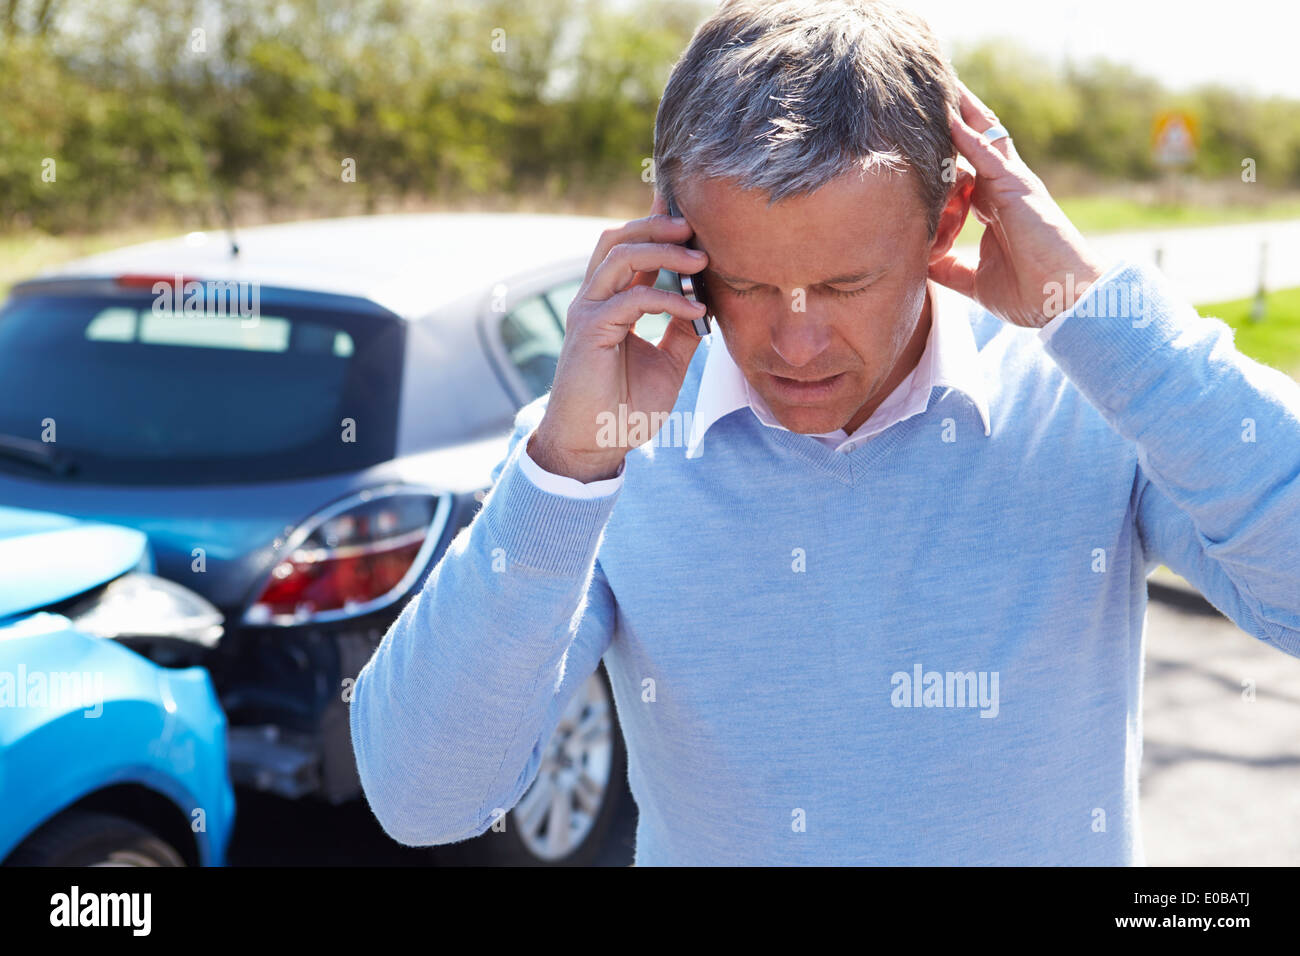 Driver Making Phone Call After Traffic Accident Stock Photo